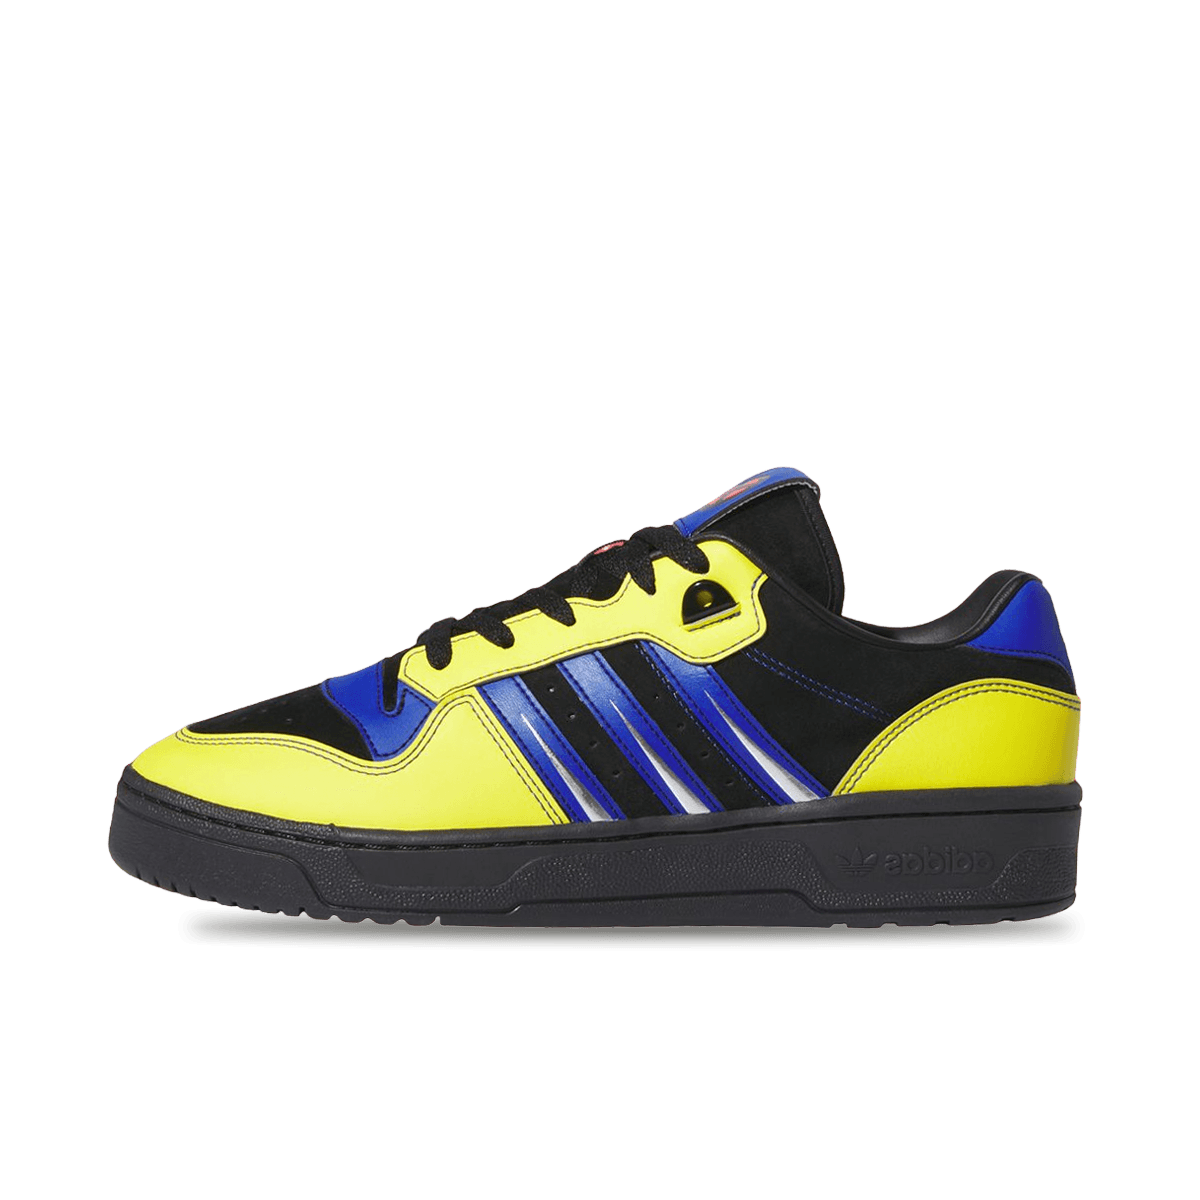 Marvel x adidas Rivalry Low 'Wolverine'